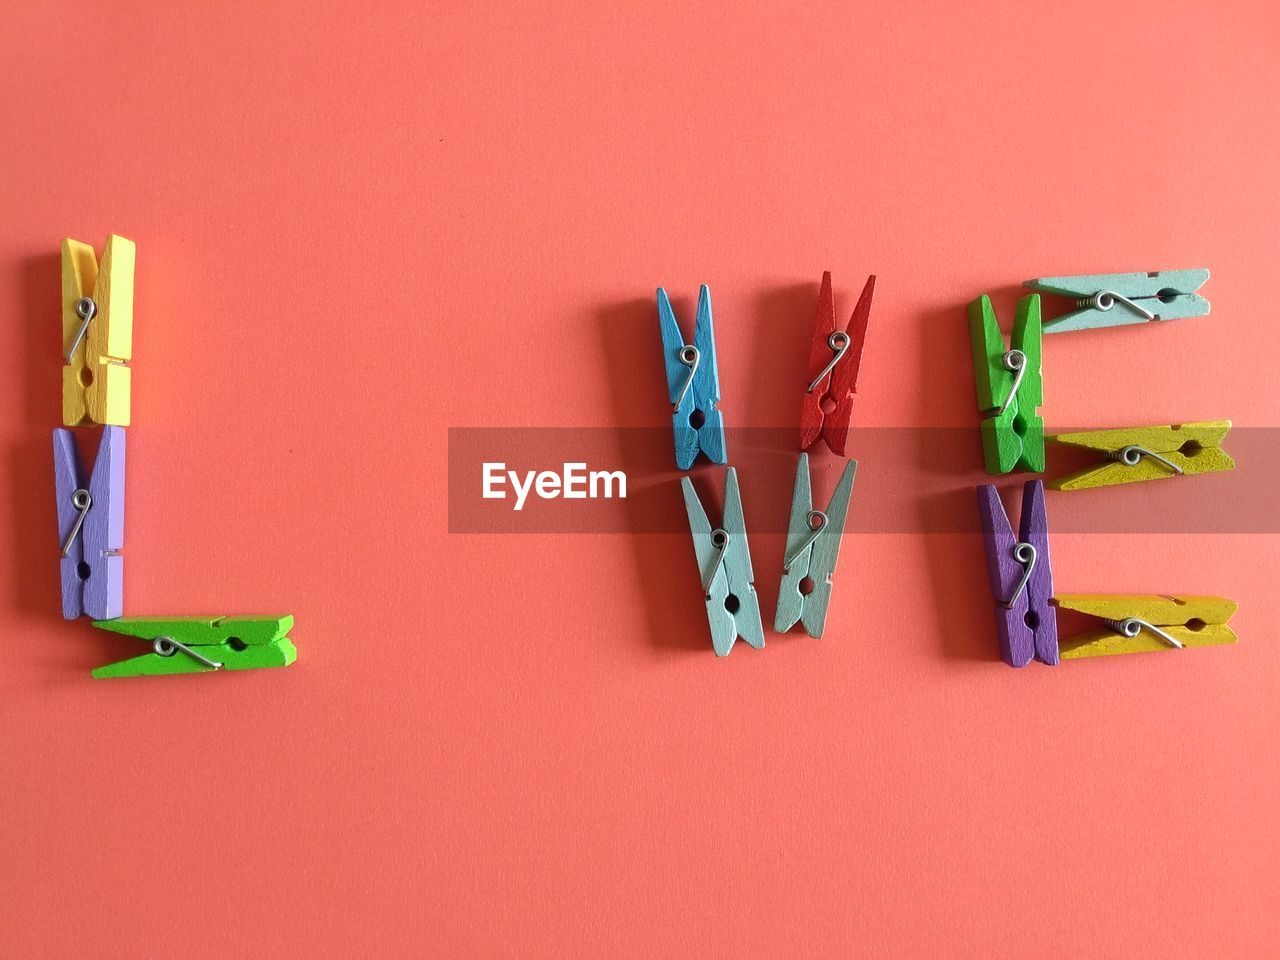 High angle view of colorful wooden clothespins arranged on coral background